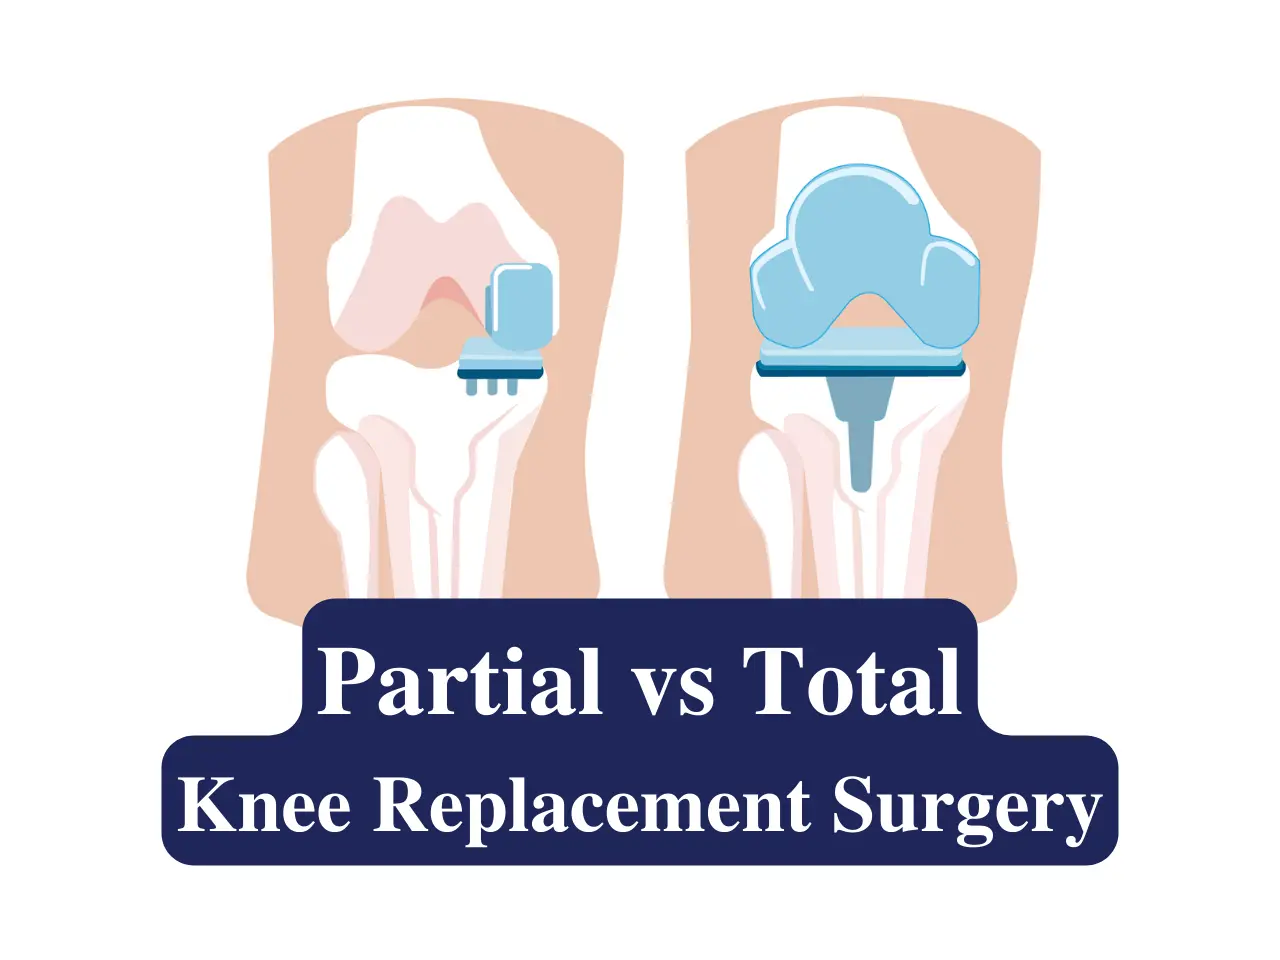 Partial vs Total Knee Replacement surgery